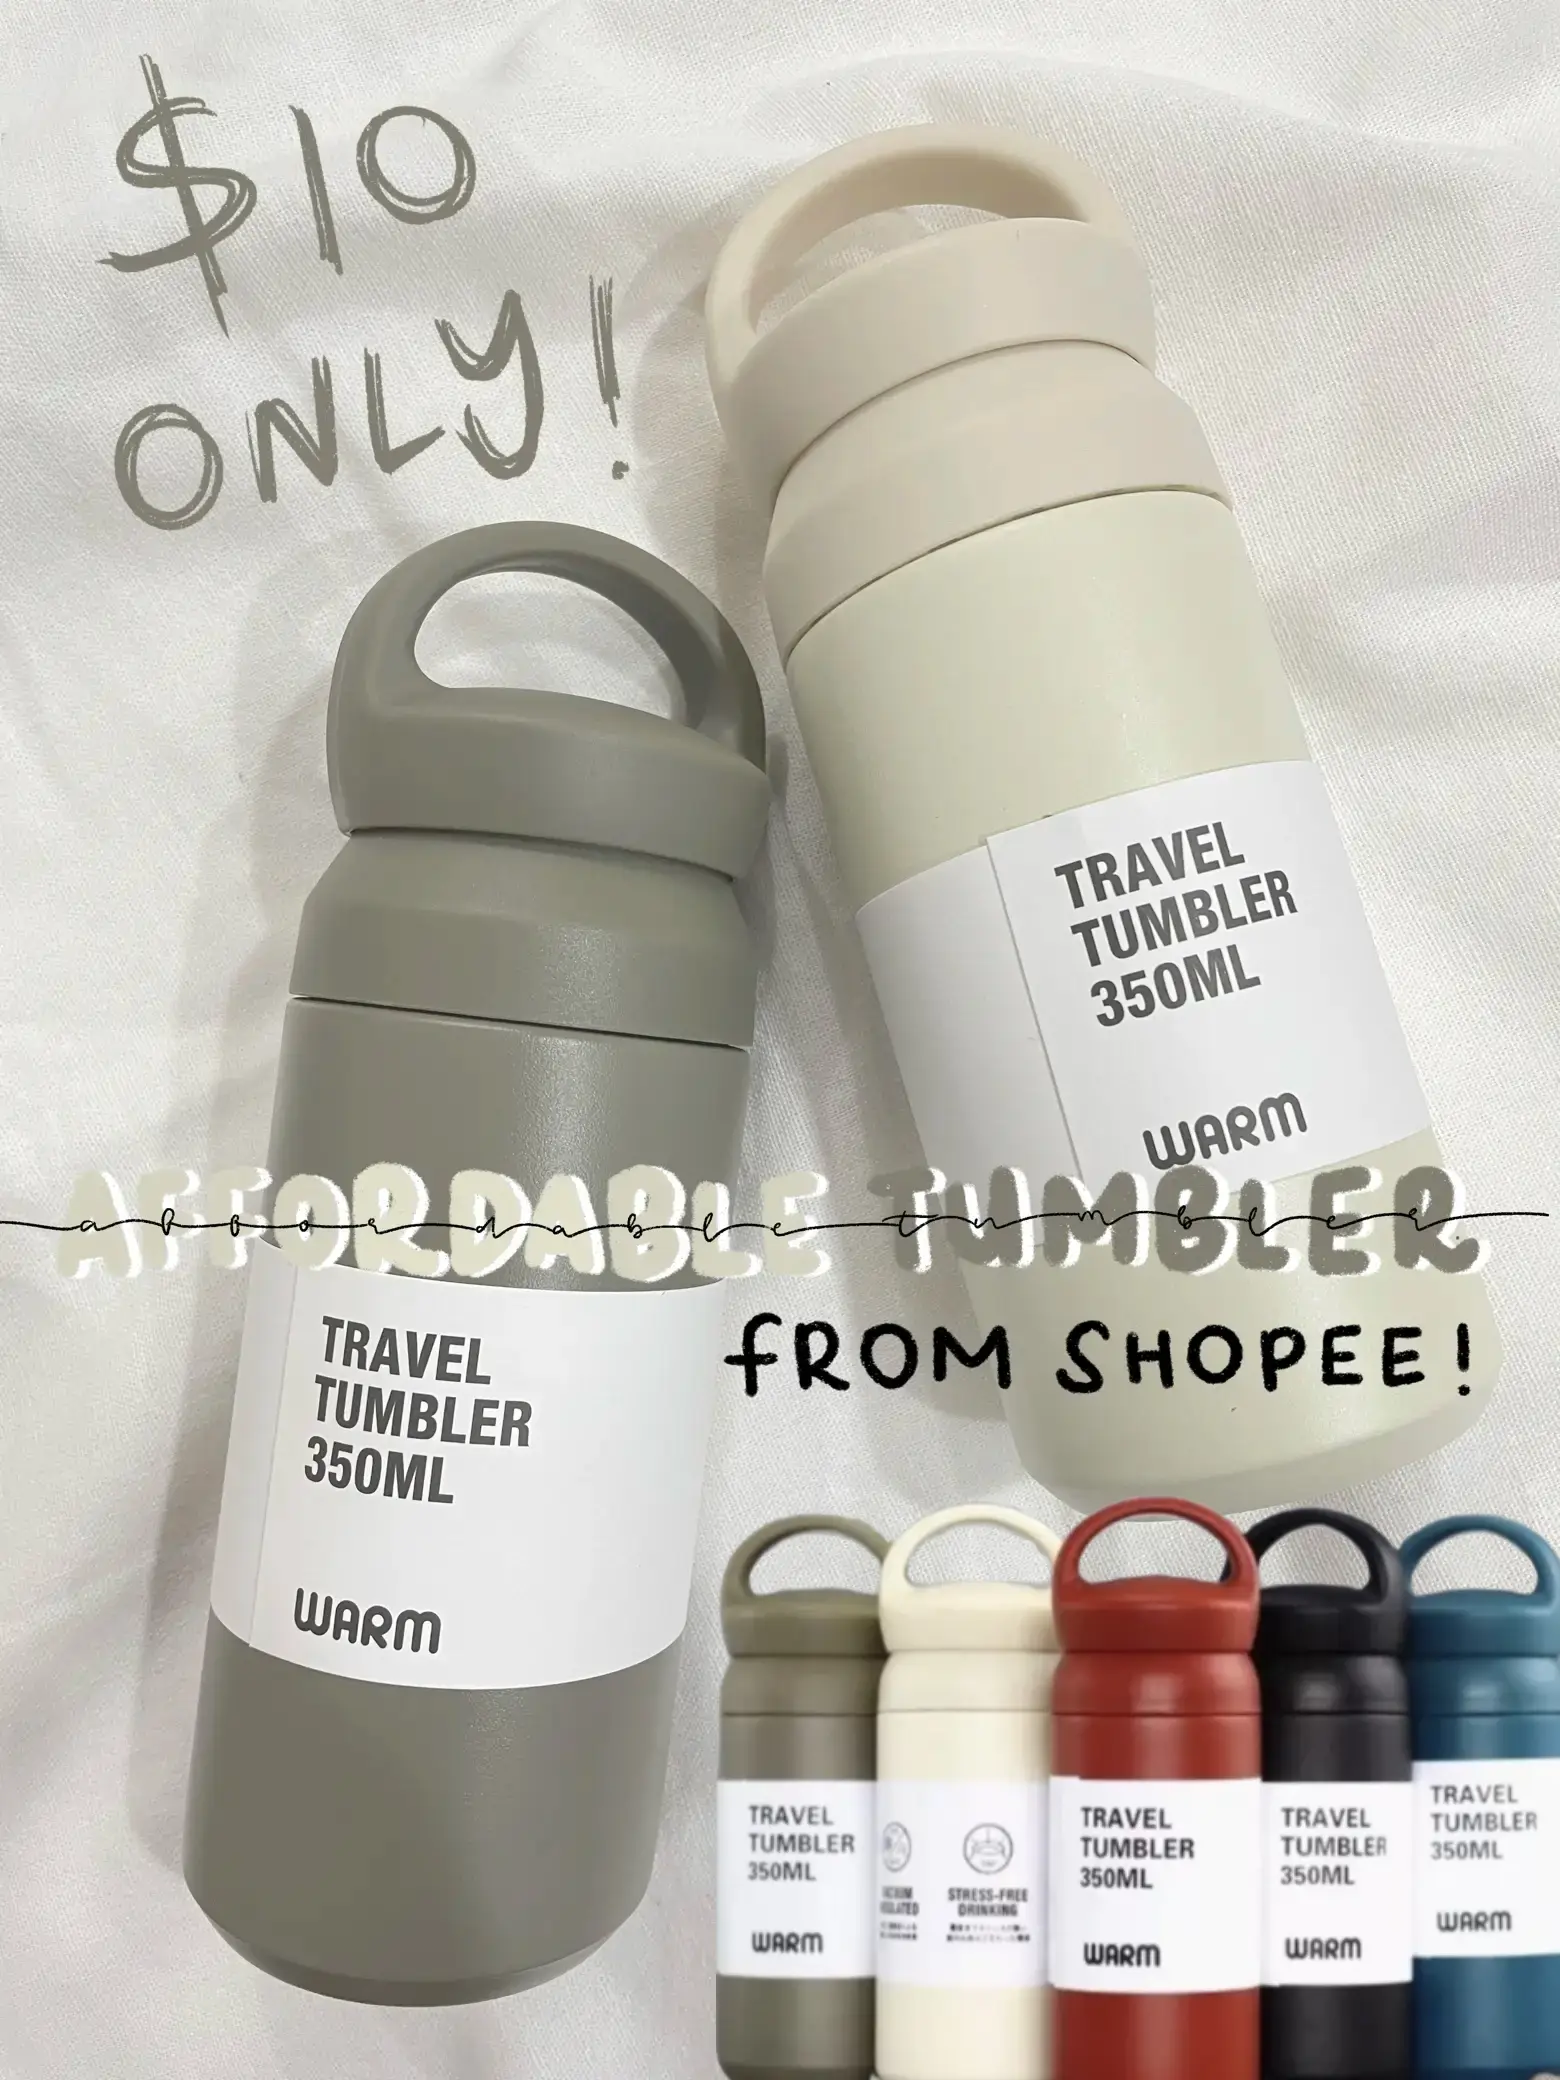 get this from shopee instead of a hydroflask😮‍💨, Gallery posted by jol  *ੈ✩‧₊˚